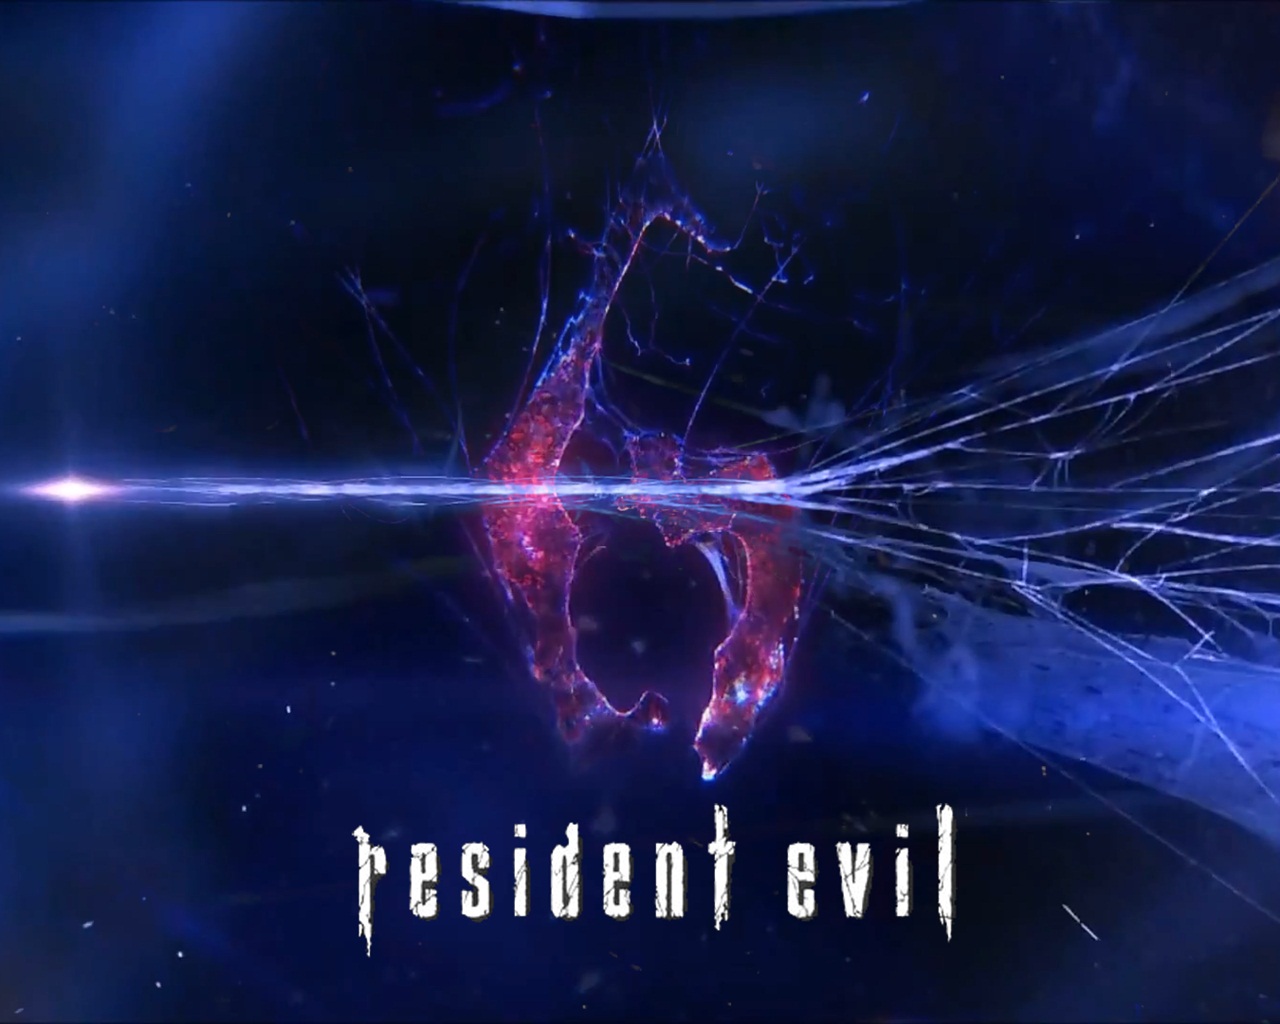 Resident Evil 6 HD game wallpapers #12 - 1280x1024